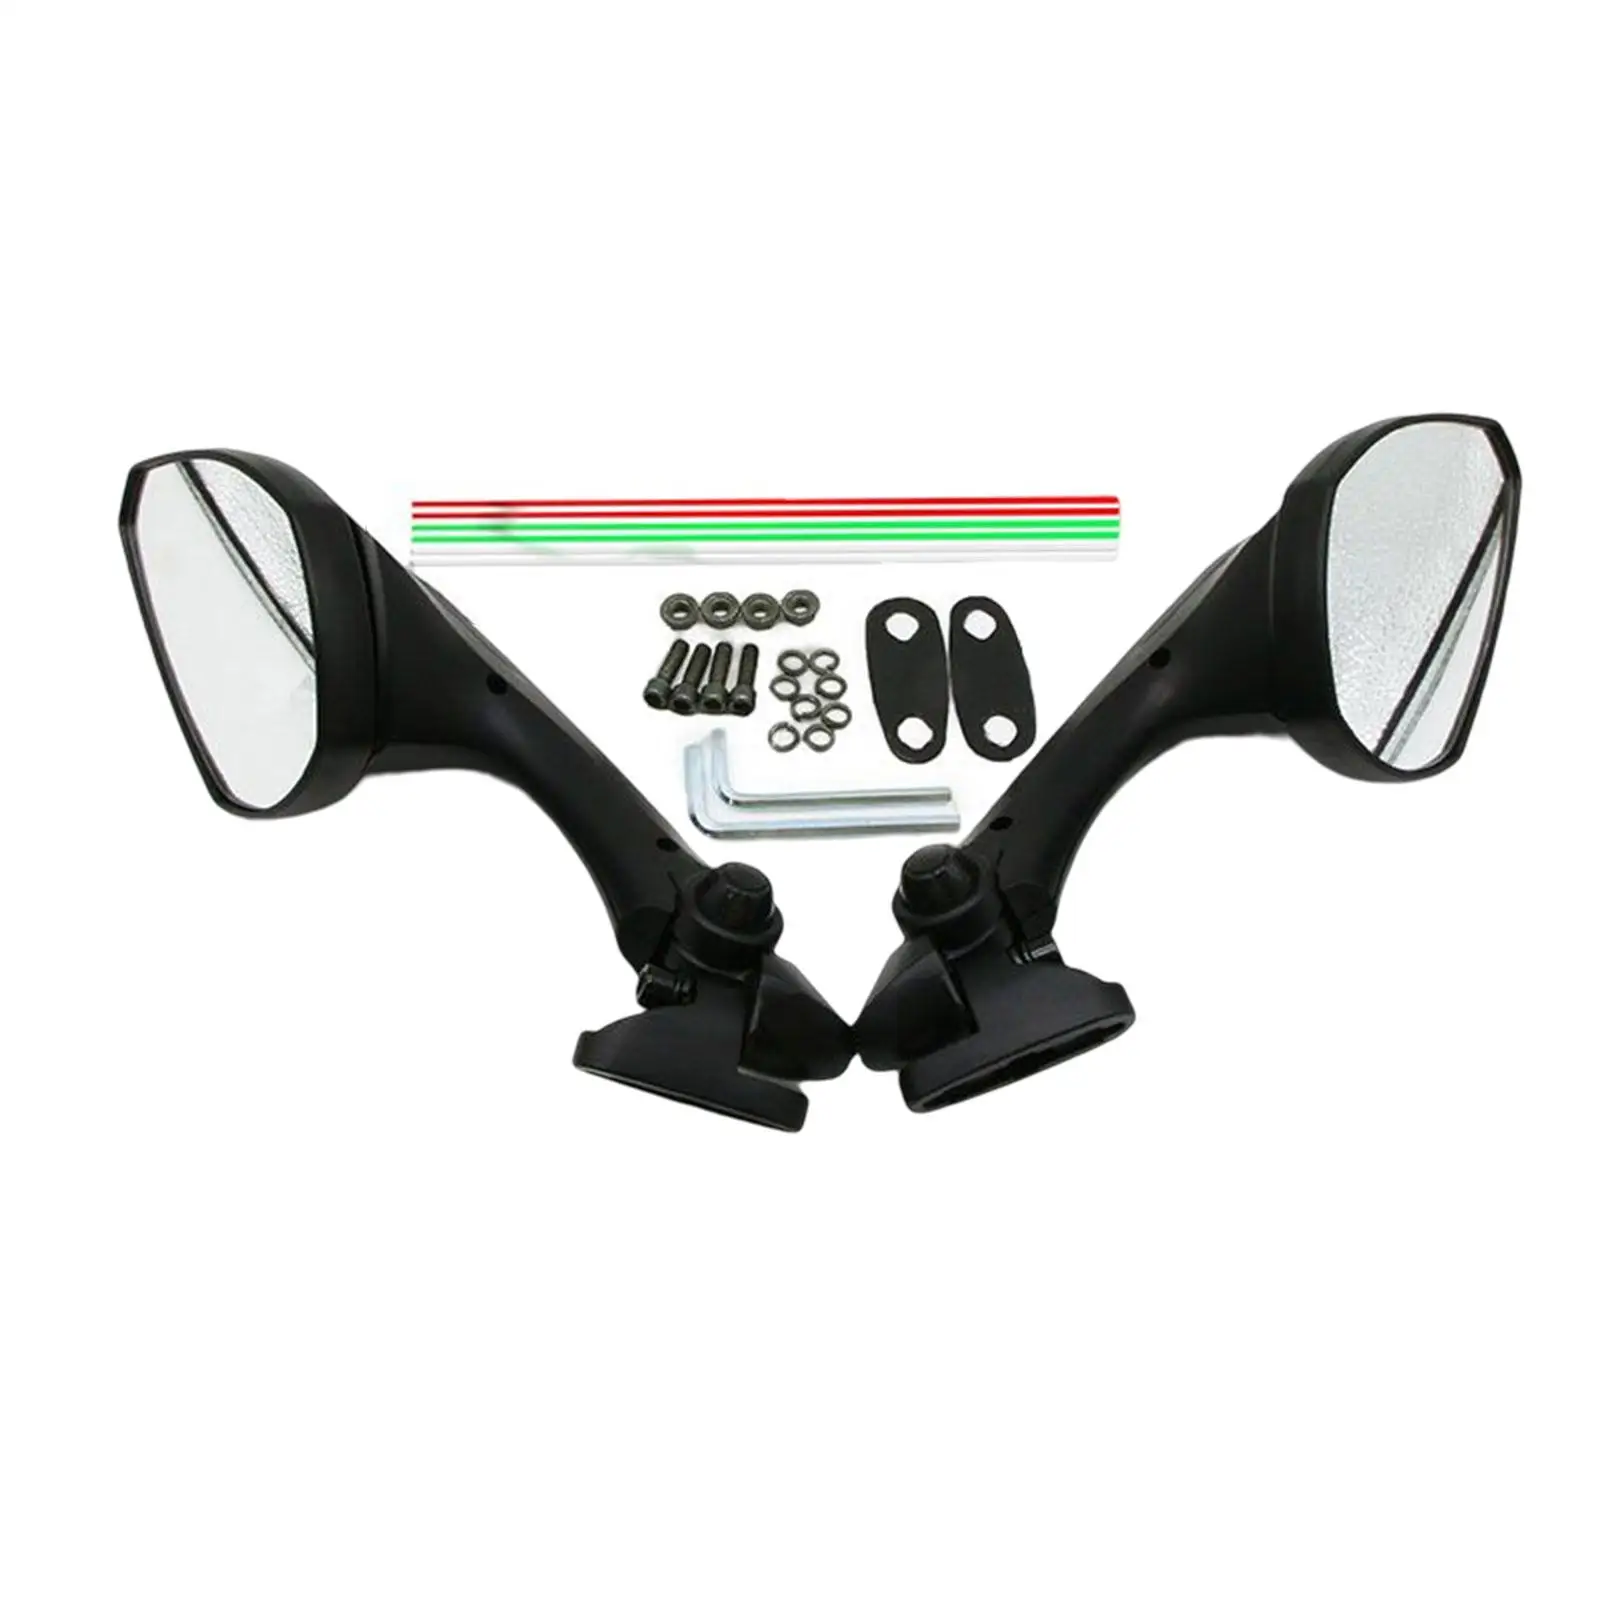 

2Pcs Motorcycle Rearview Mirrors with Mounting Hardware Handlebar Side View